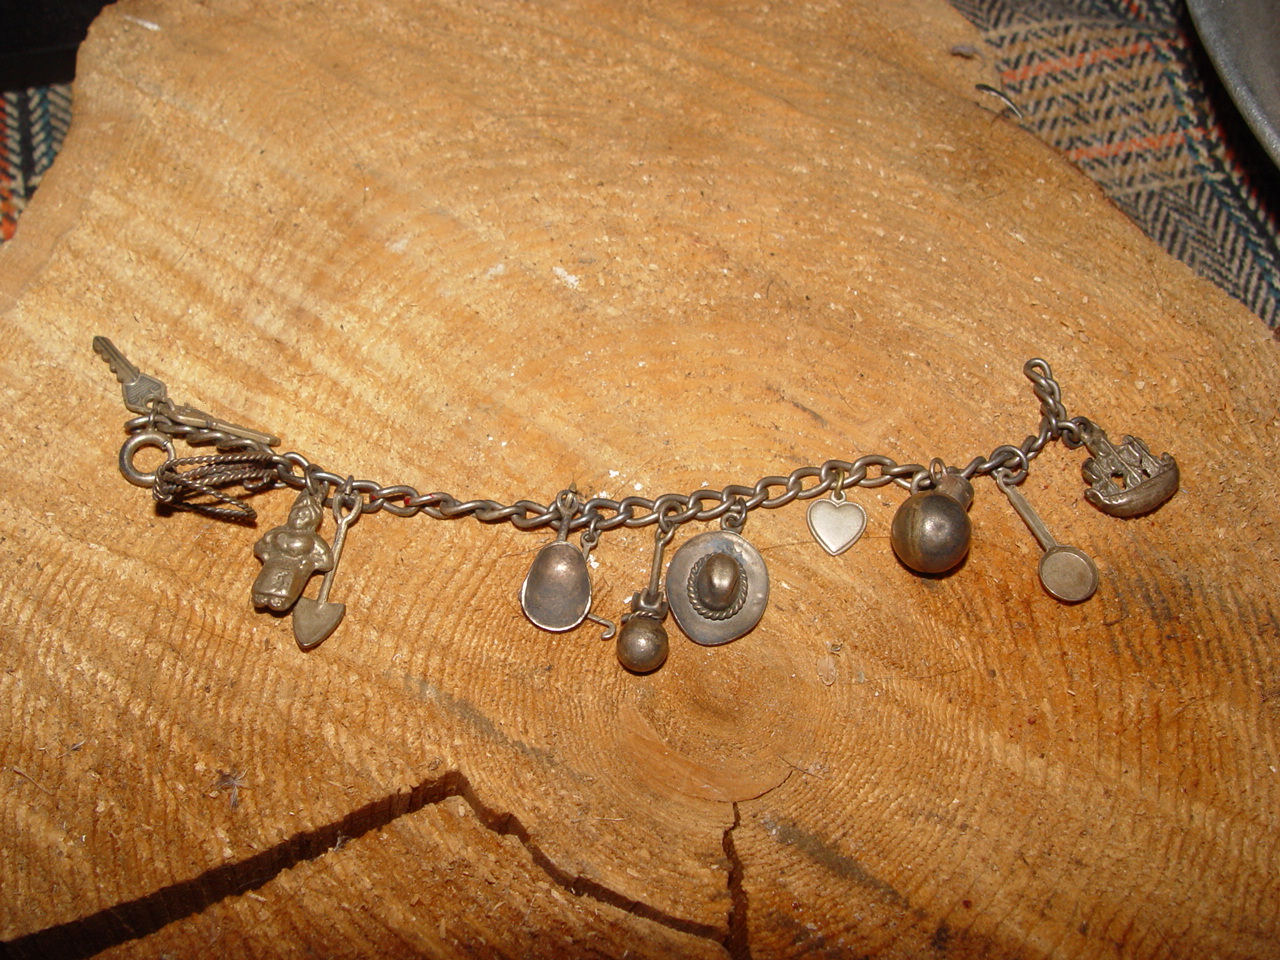 Silver Mexican Cowboy
                                        Western Gold Rush, Miner Charm
                                        Bracelet c. 1930's